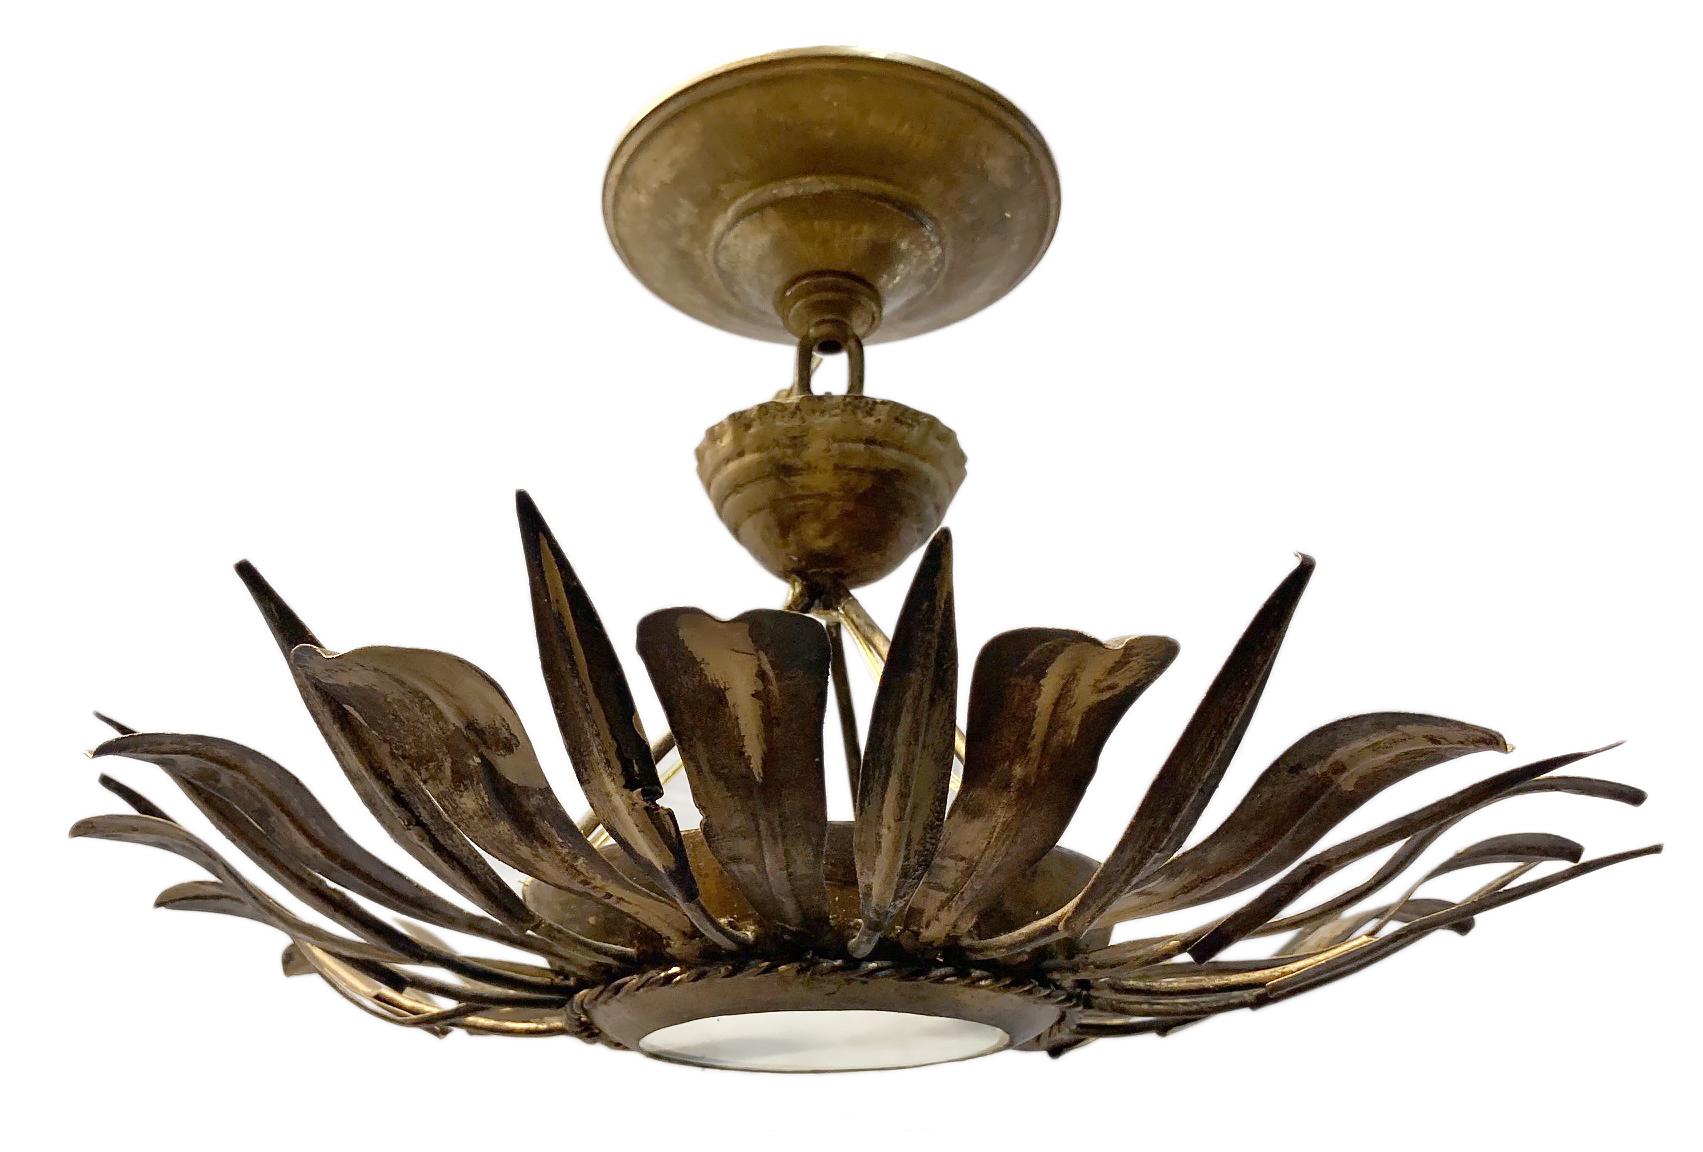 A French circa 1960s hammered and gilt metal light fixture with three lights and frosted glass inset.

Measurements:
Height 8